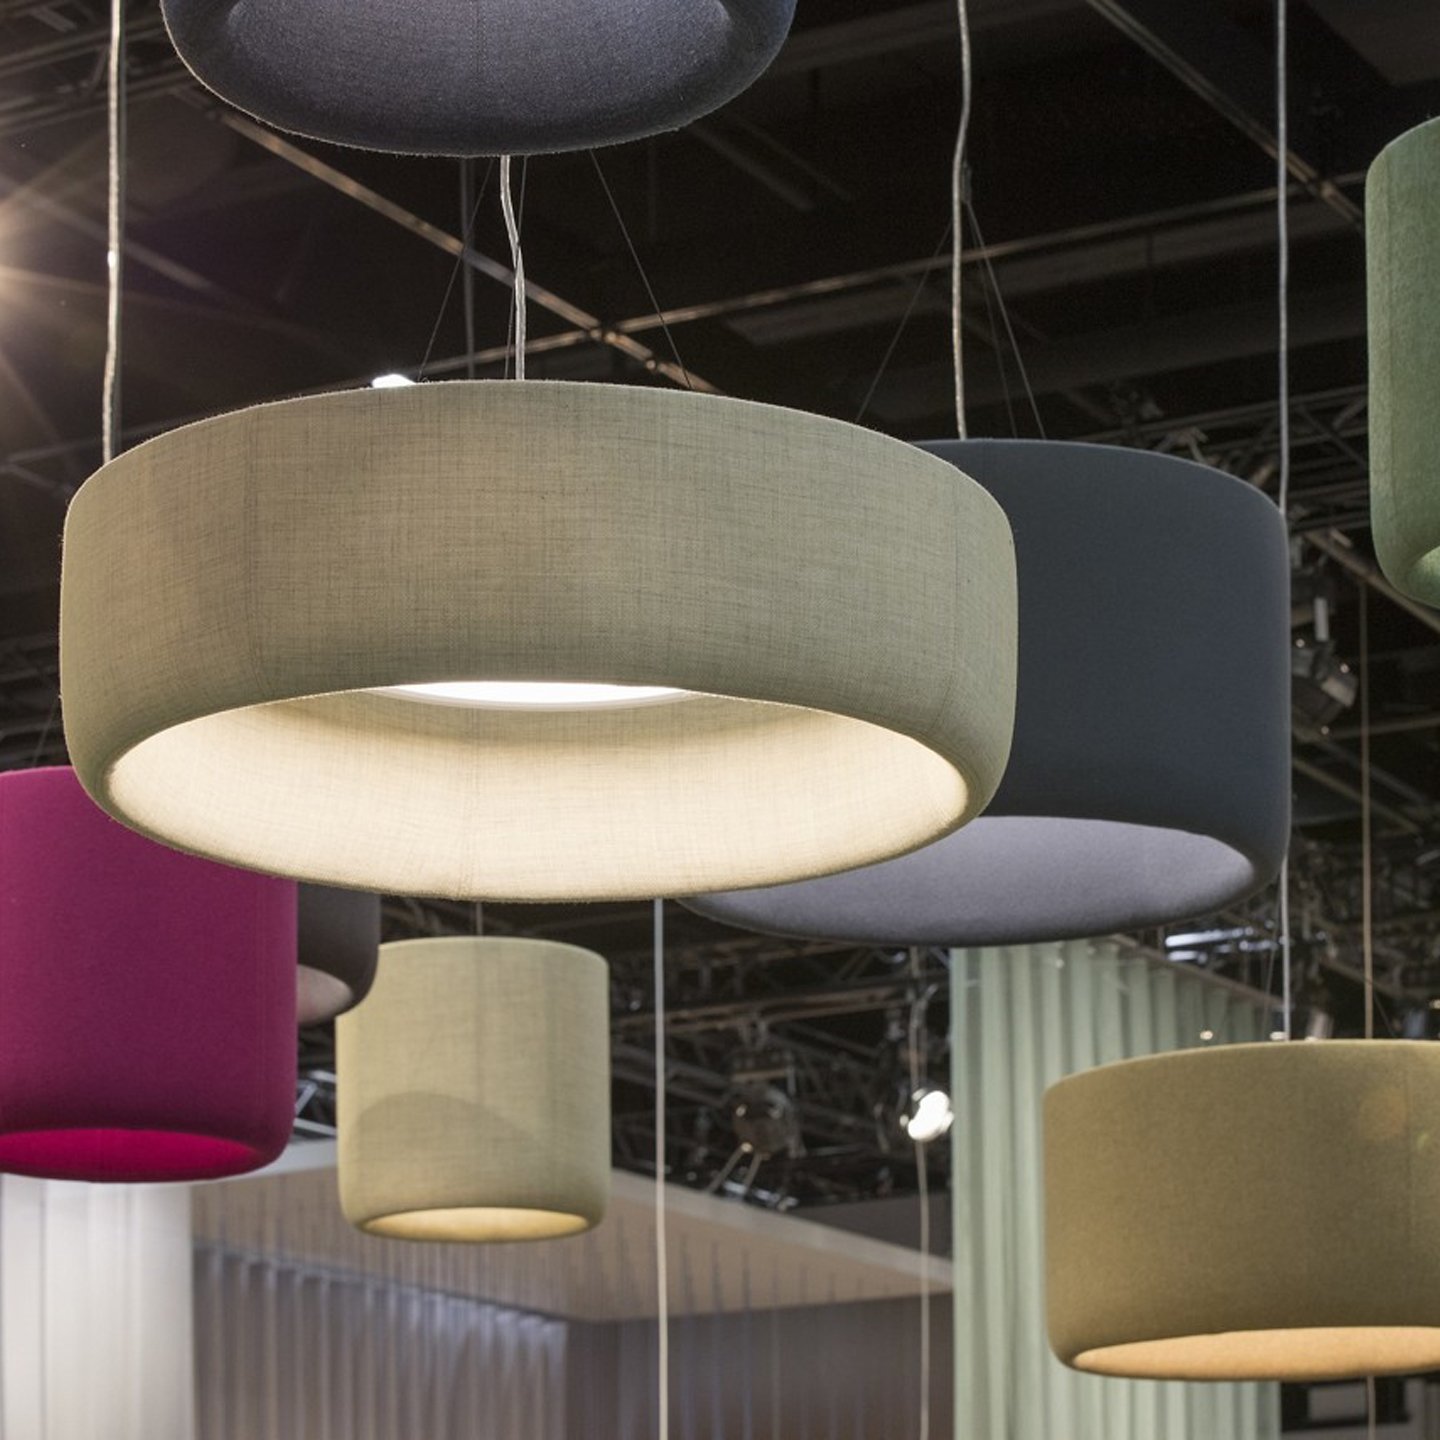 Haworth BuzziJet Lighting in multiple colors hanging from office space ceiling 